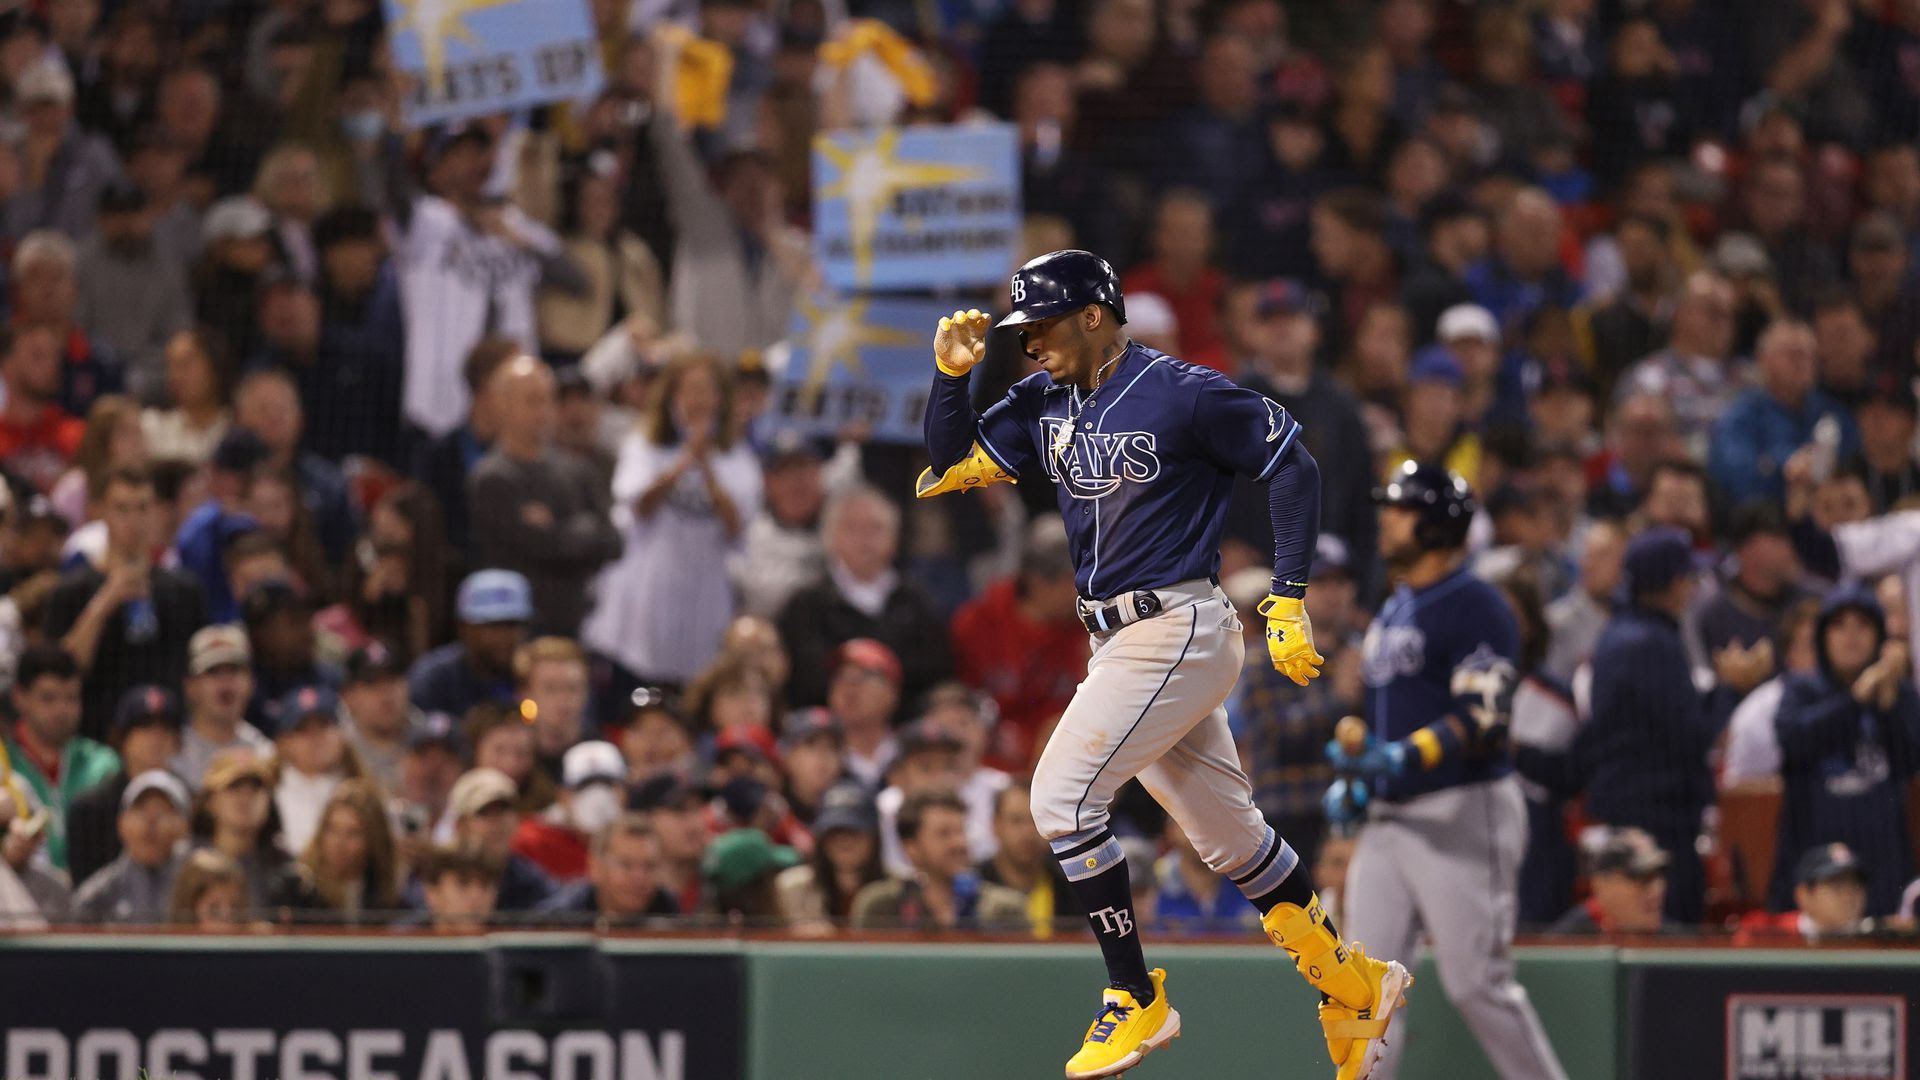 Rays fans celebrate at Fenway Park in Boston during Game 3 of the ALDS as Wander Franco celebrates a home run.